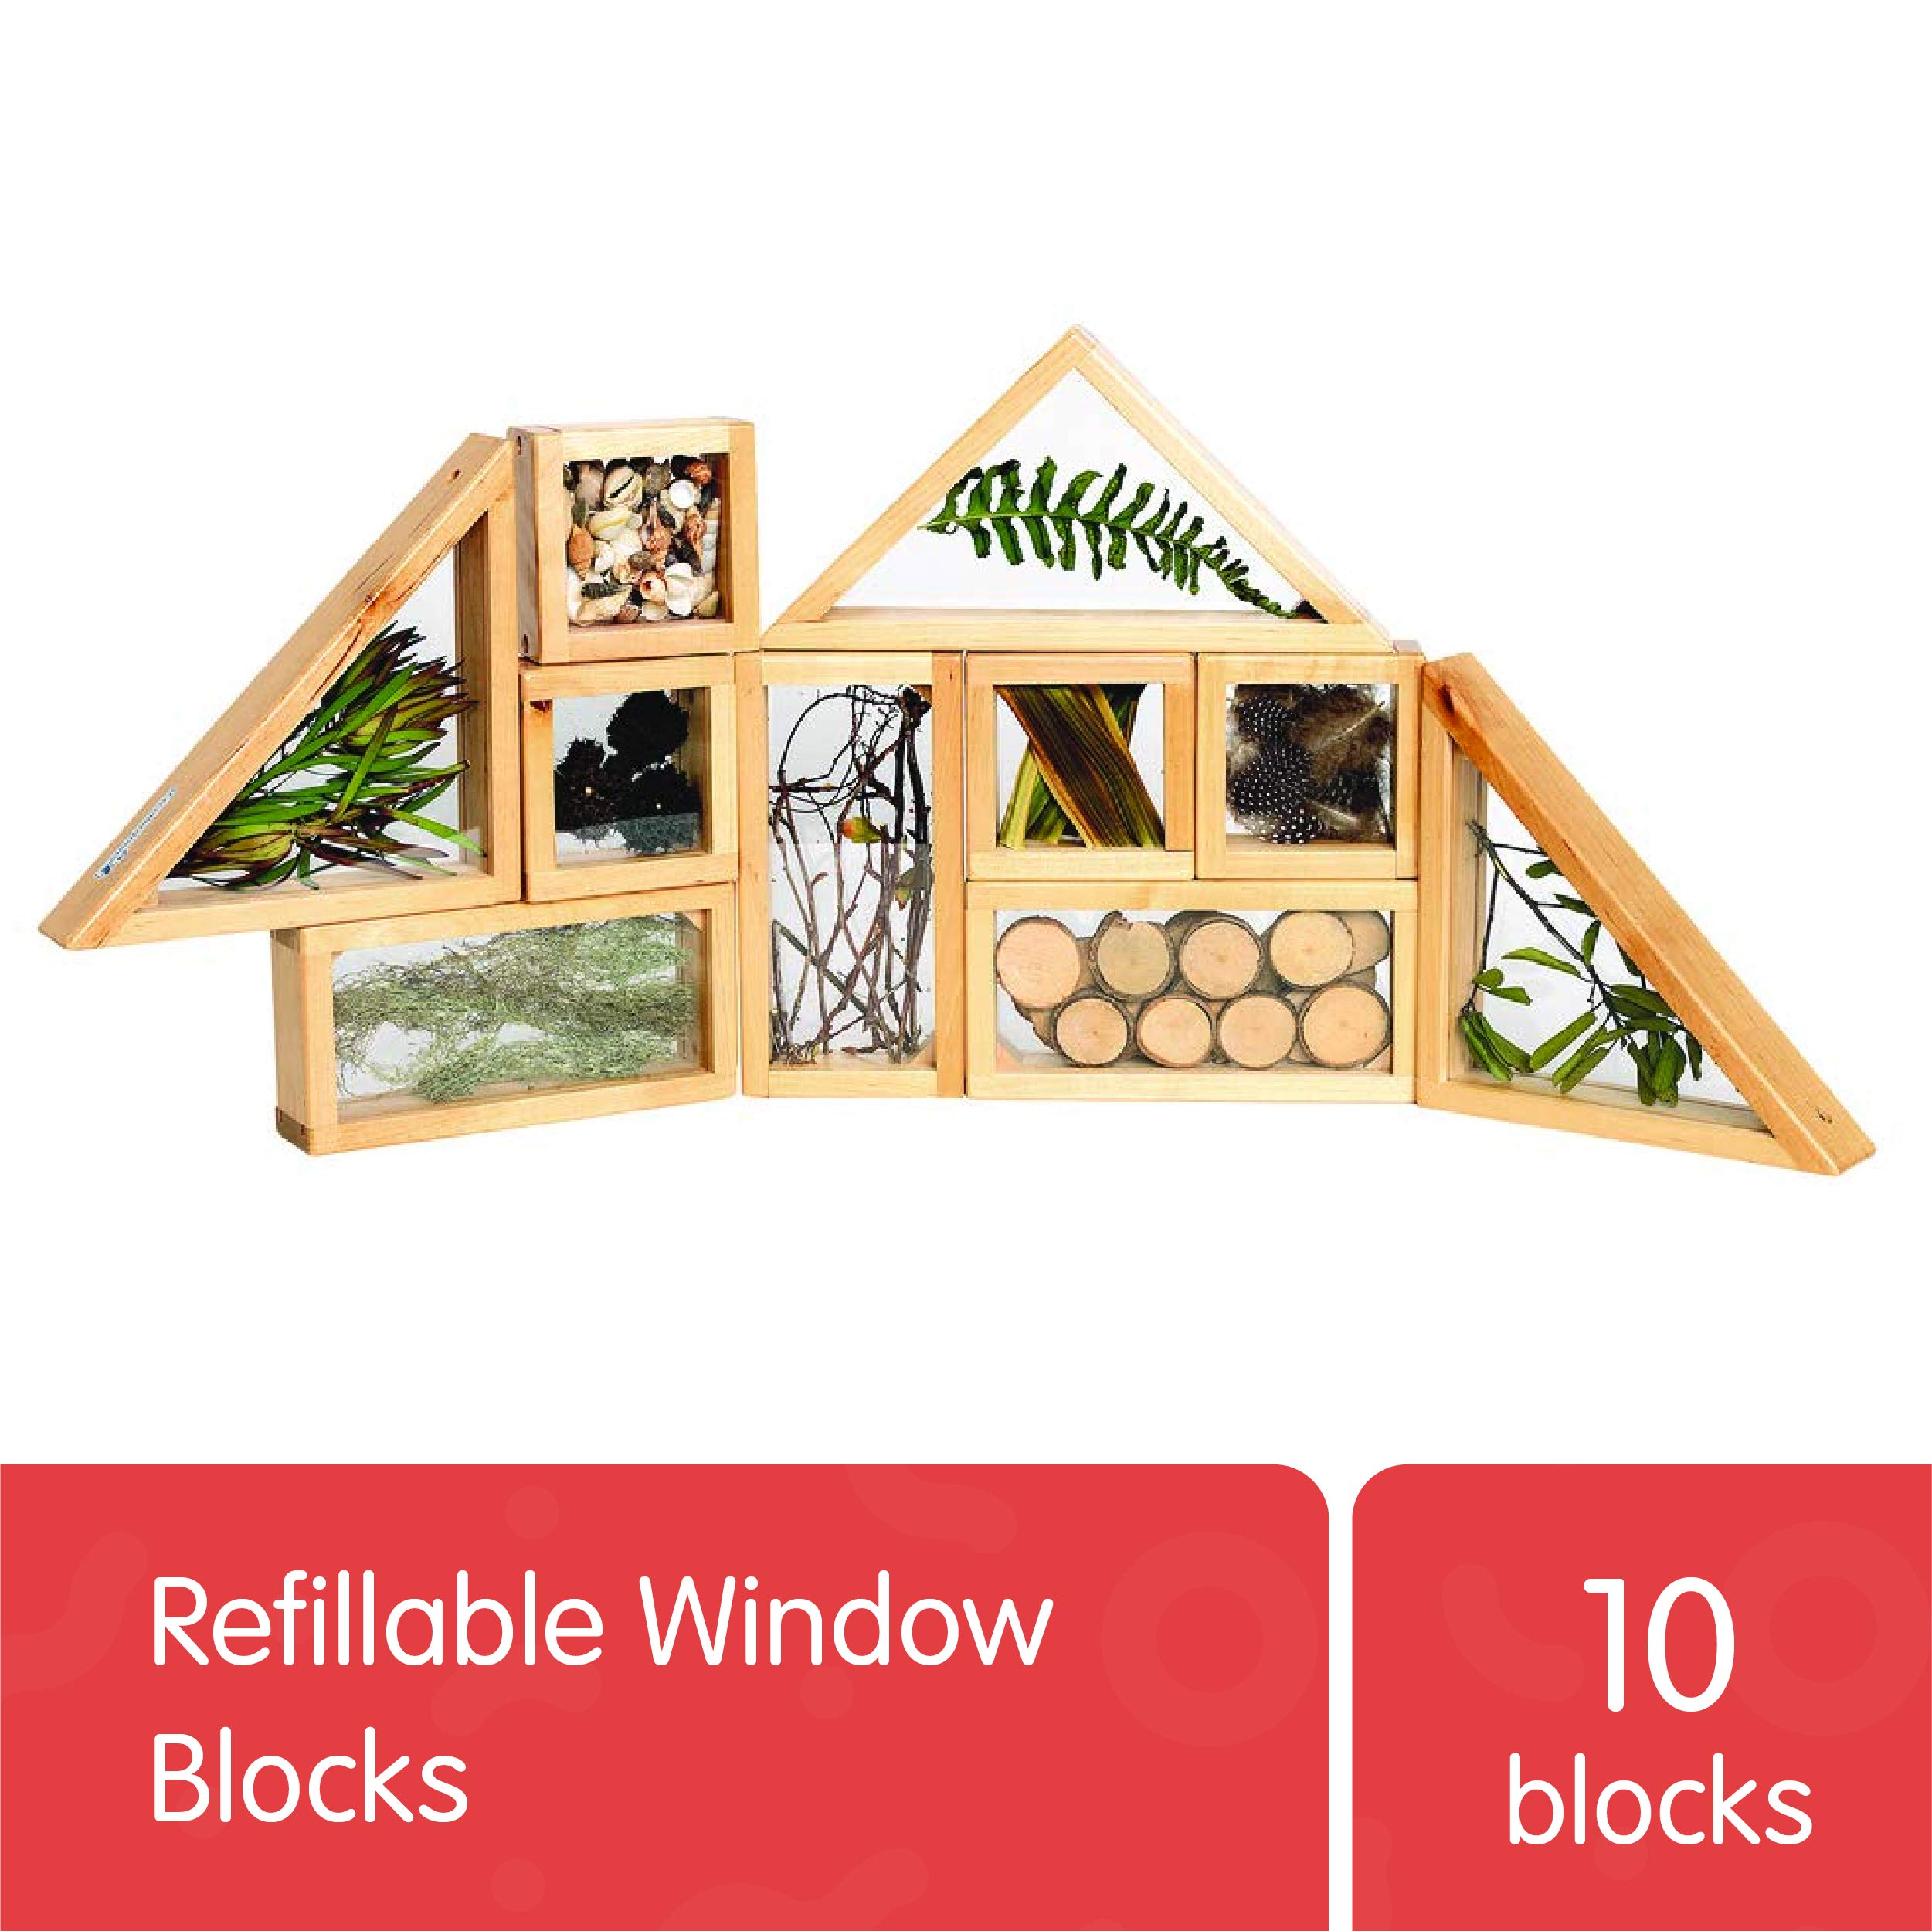 Excellerations Refillable Window Blocks Wood Classroom or Home School Set for Young Learners (Set of 10) (Item # Fill)